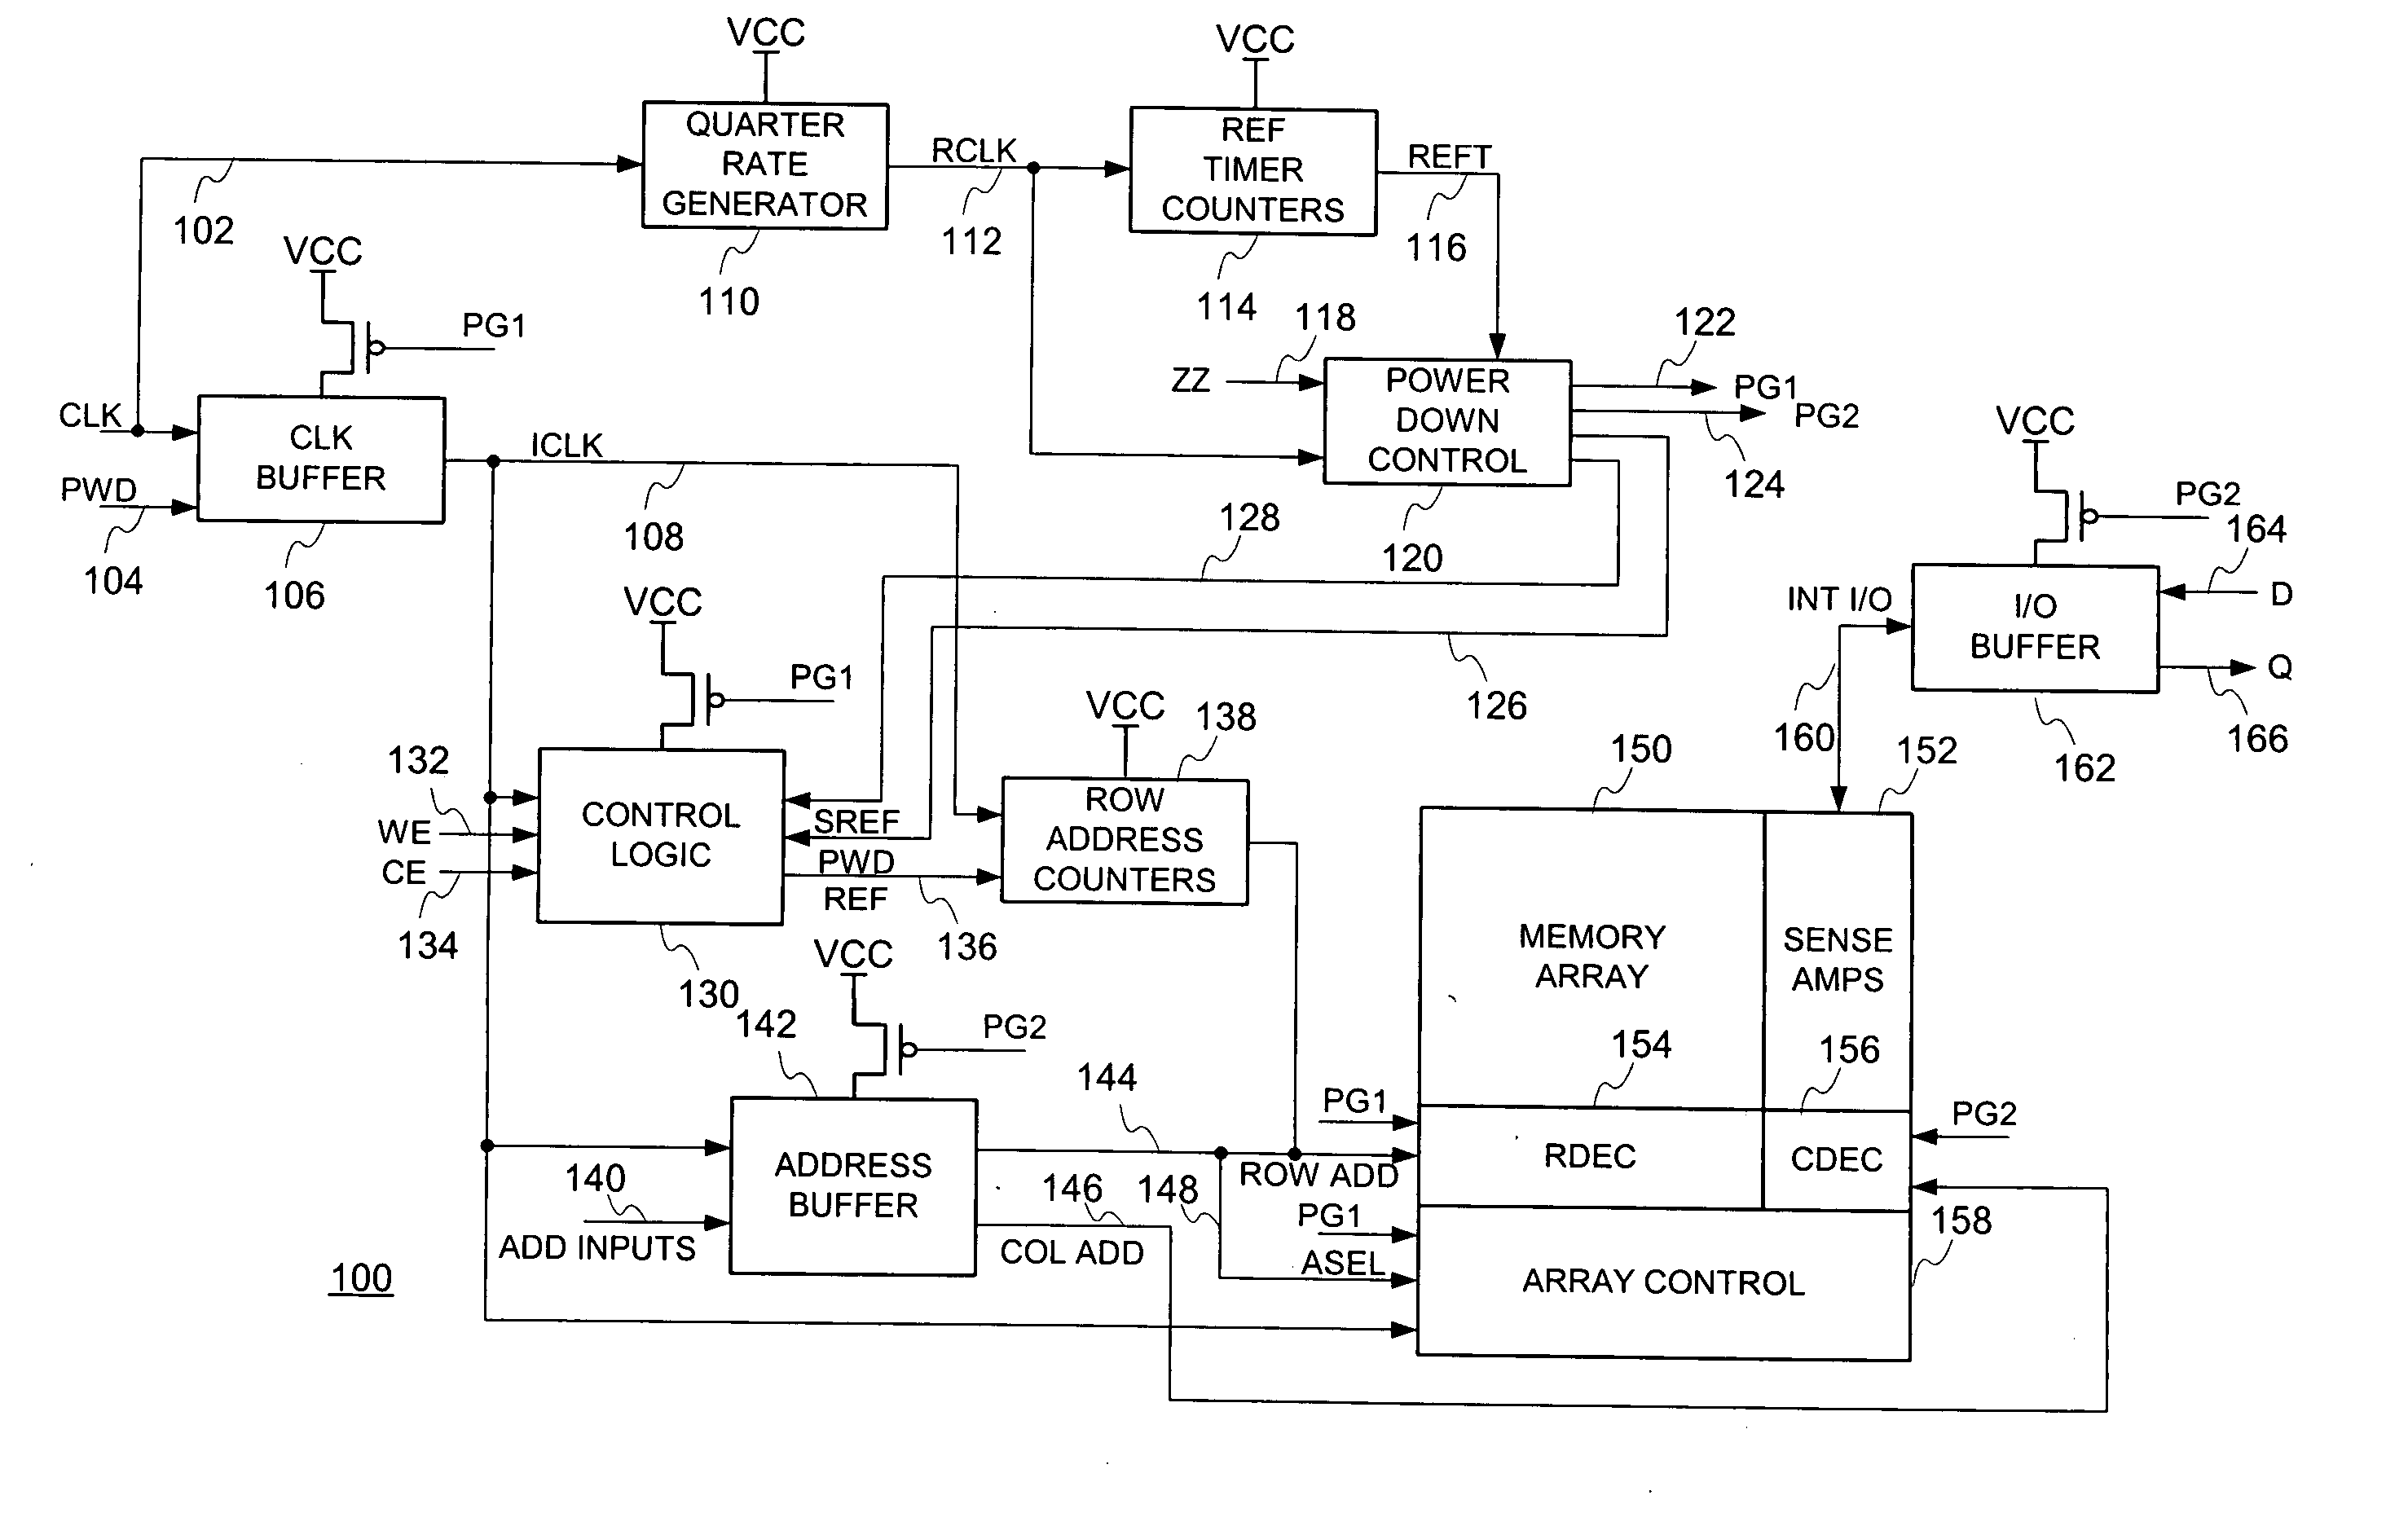 Low power sleep mode operation technique for dynamic random access memory (DRAM) devices and integrated circuit devices incorporating embedded DRAM